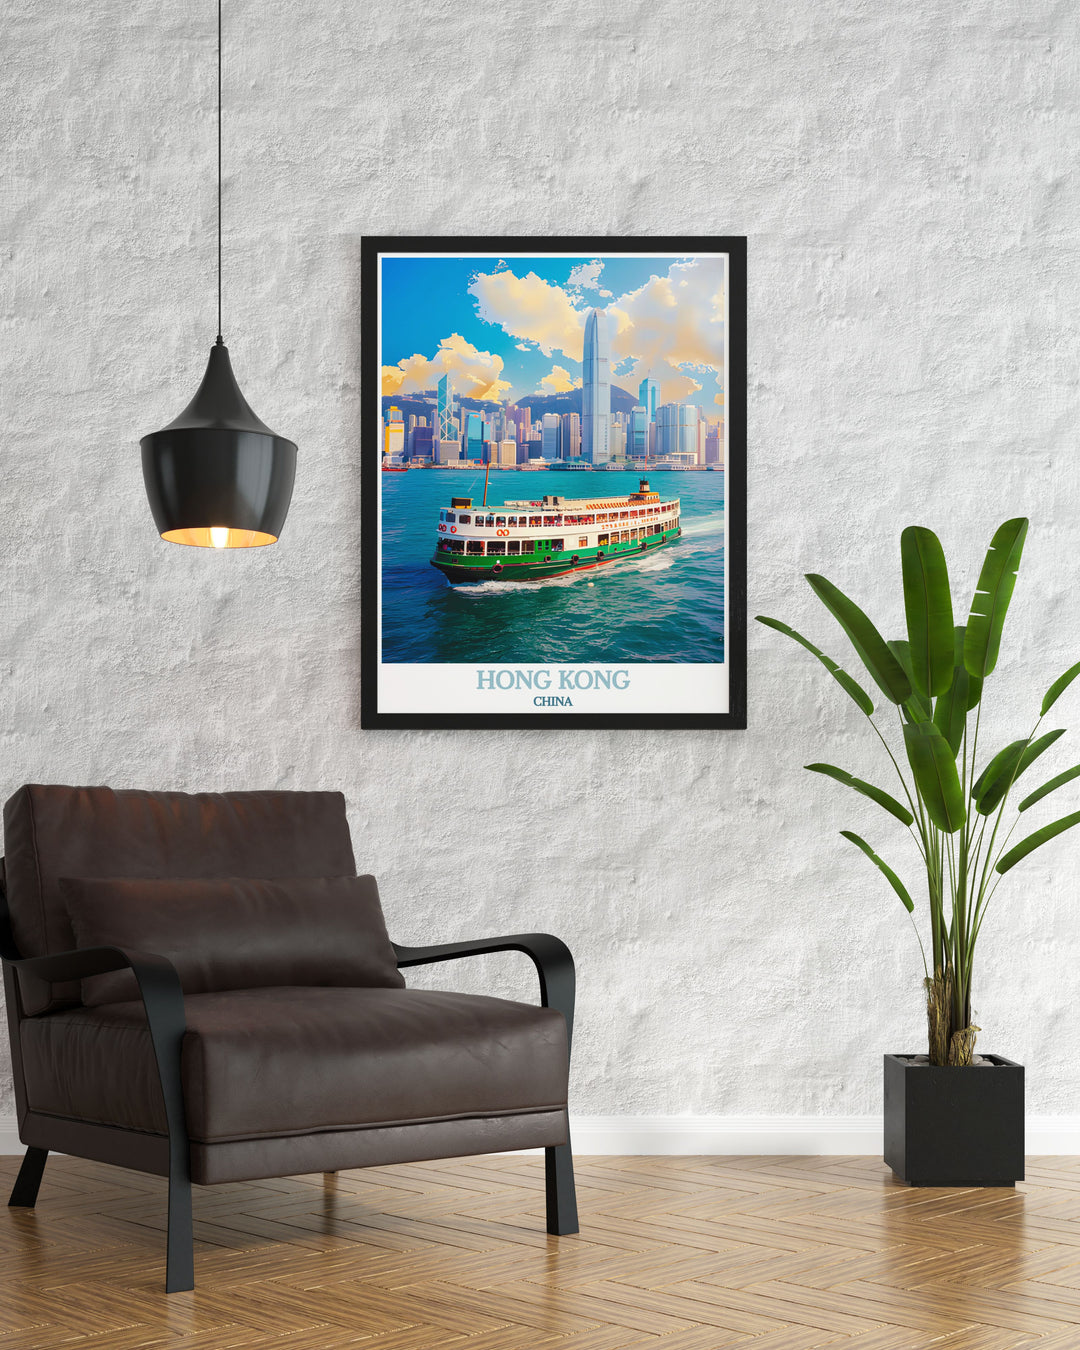 Highlighting the serene yet dynamic beauty of Hong Kongs skyline, this travel poster captures the citys architectural marvels and waterfront views. Perfect for those who appreciate modern cityscapes, this artwork brings the essence of Hong Kong into your living space.